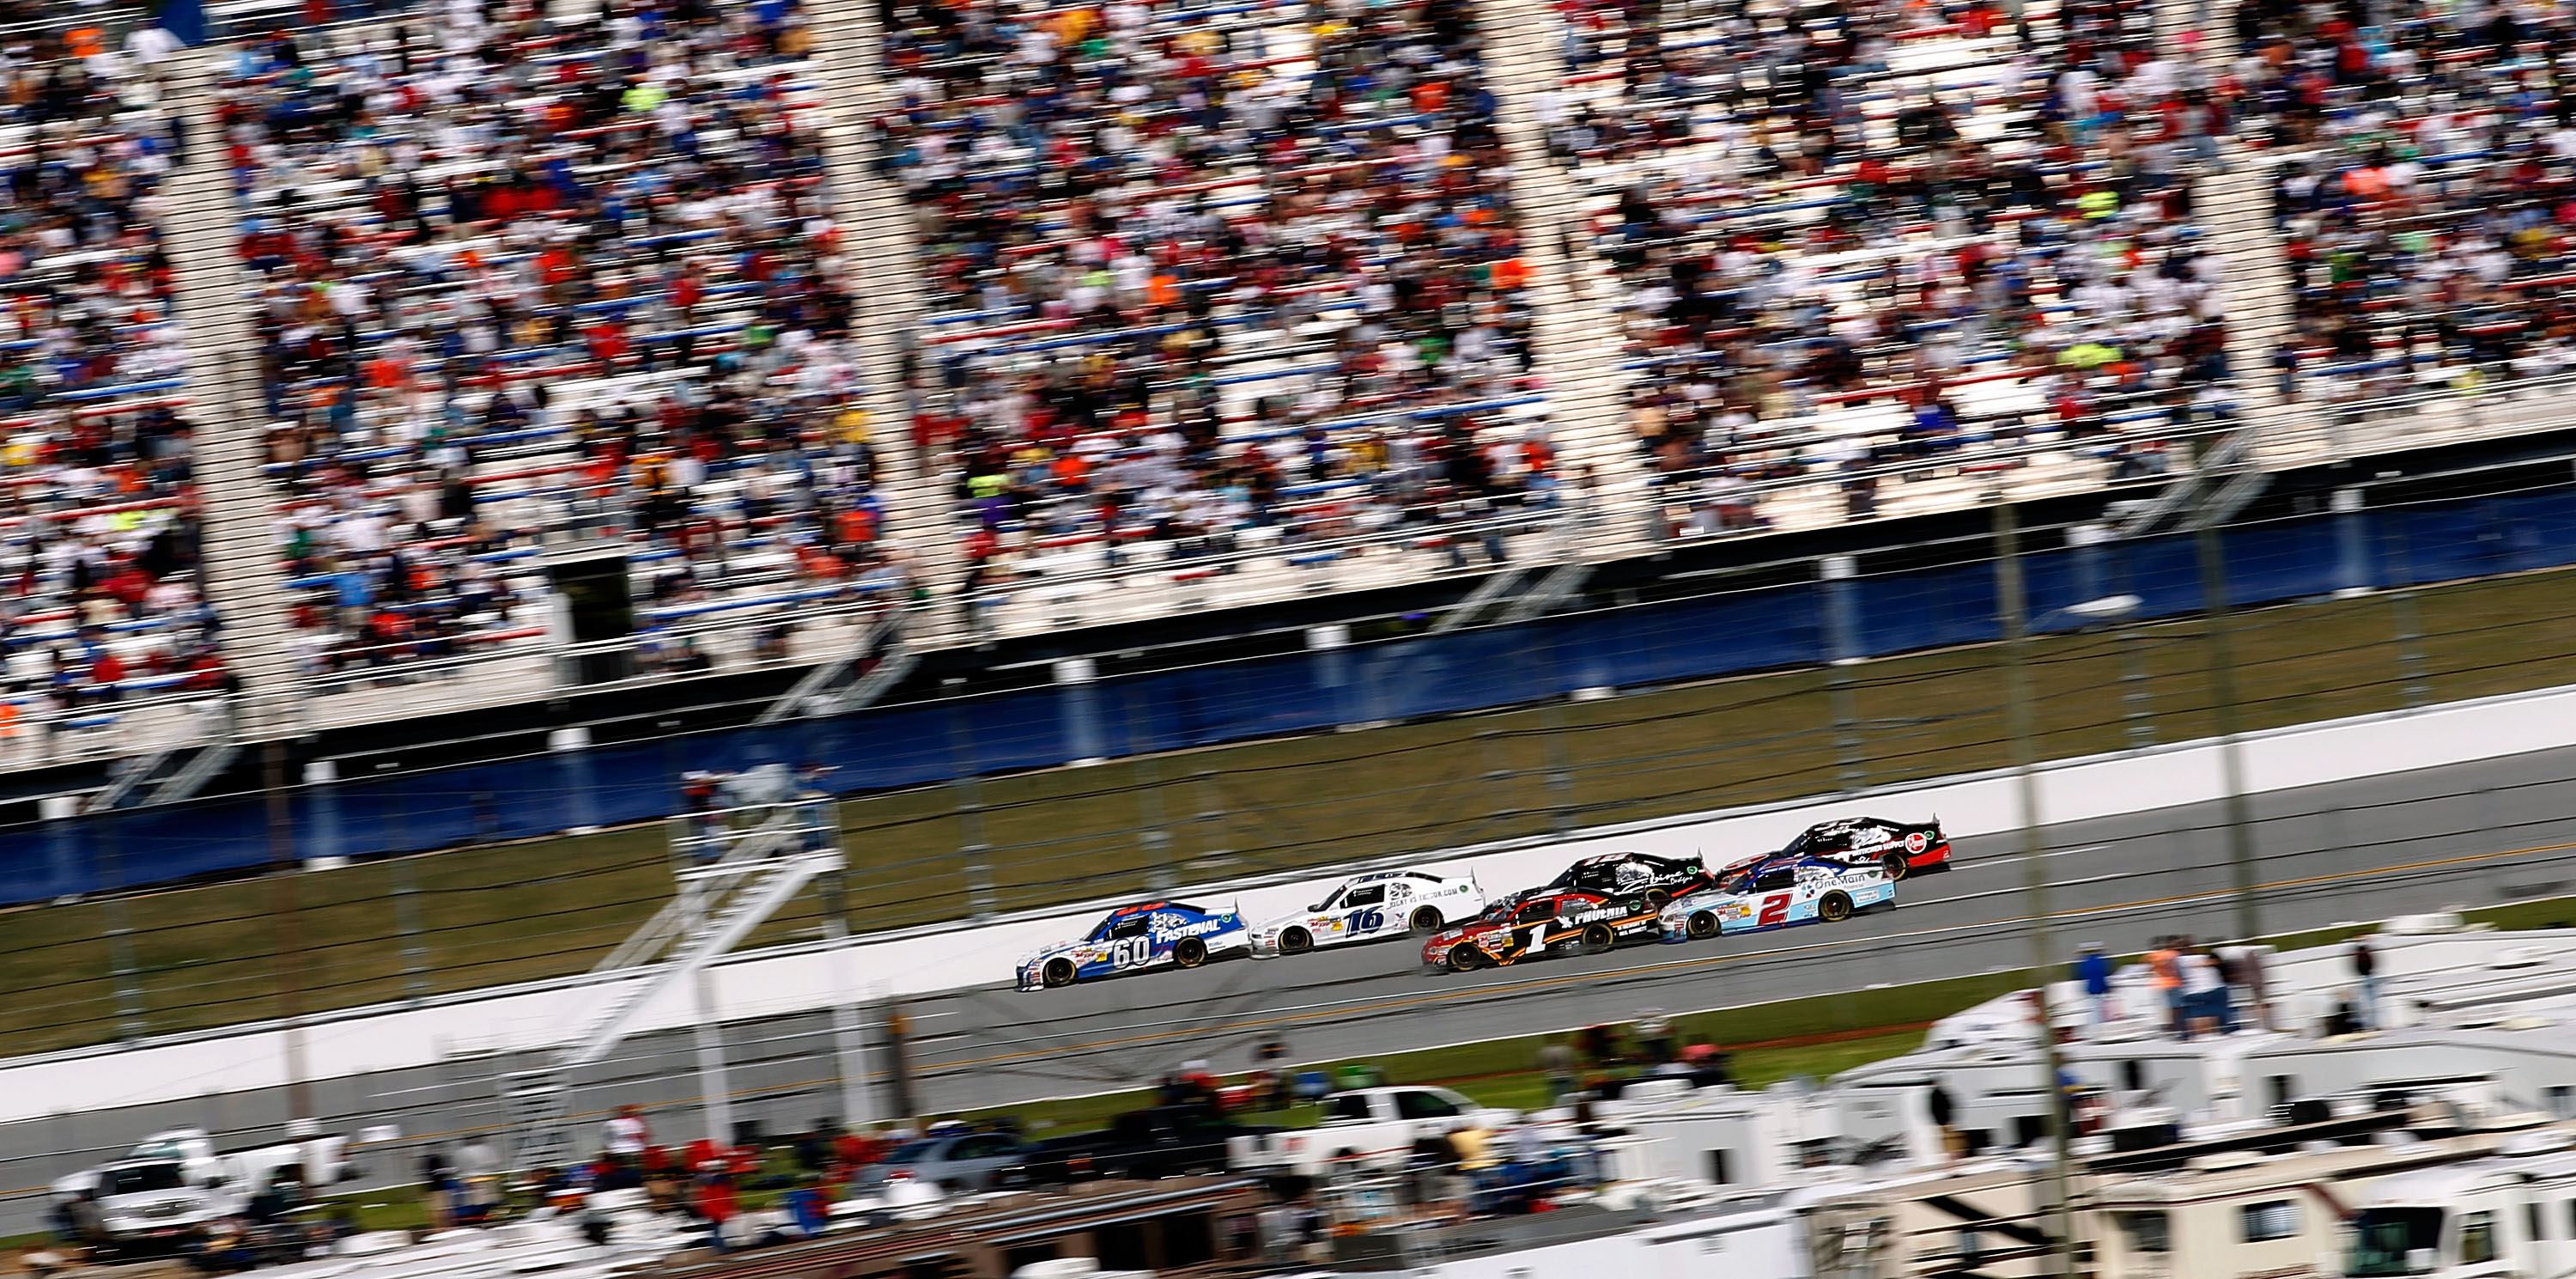 TALLADEGA, AL - APRIL 16:  Carl Edwards, driver of the #60 Fastenal Ford, leads a group of cars during the NASCAR Nationwide Series Aaron's 312 at Talladega Superspeedway on April 16, 2011 in Talladega, Alabama.  (Photo by Tom Pennington/Getty Images for